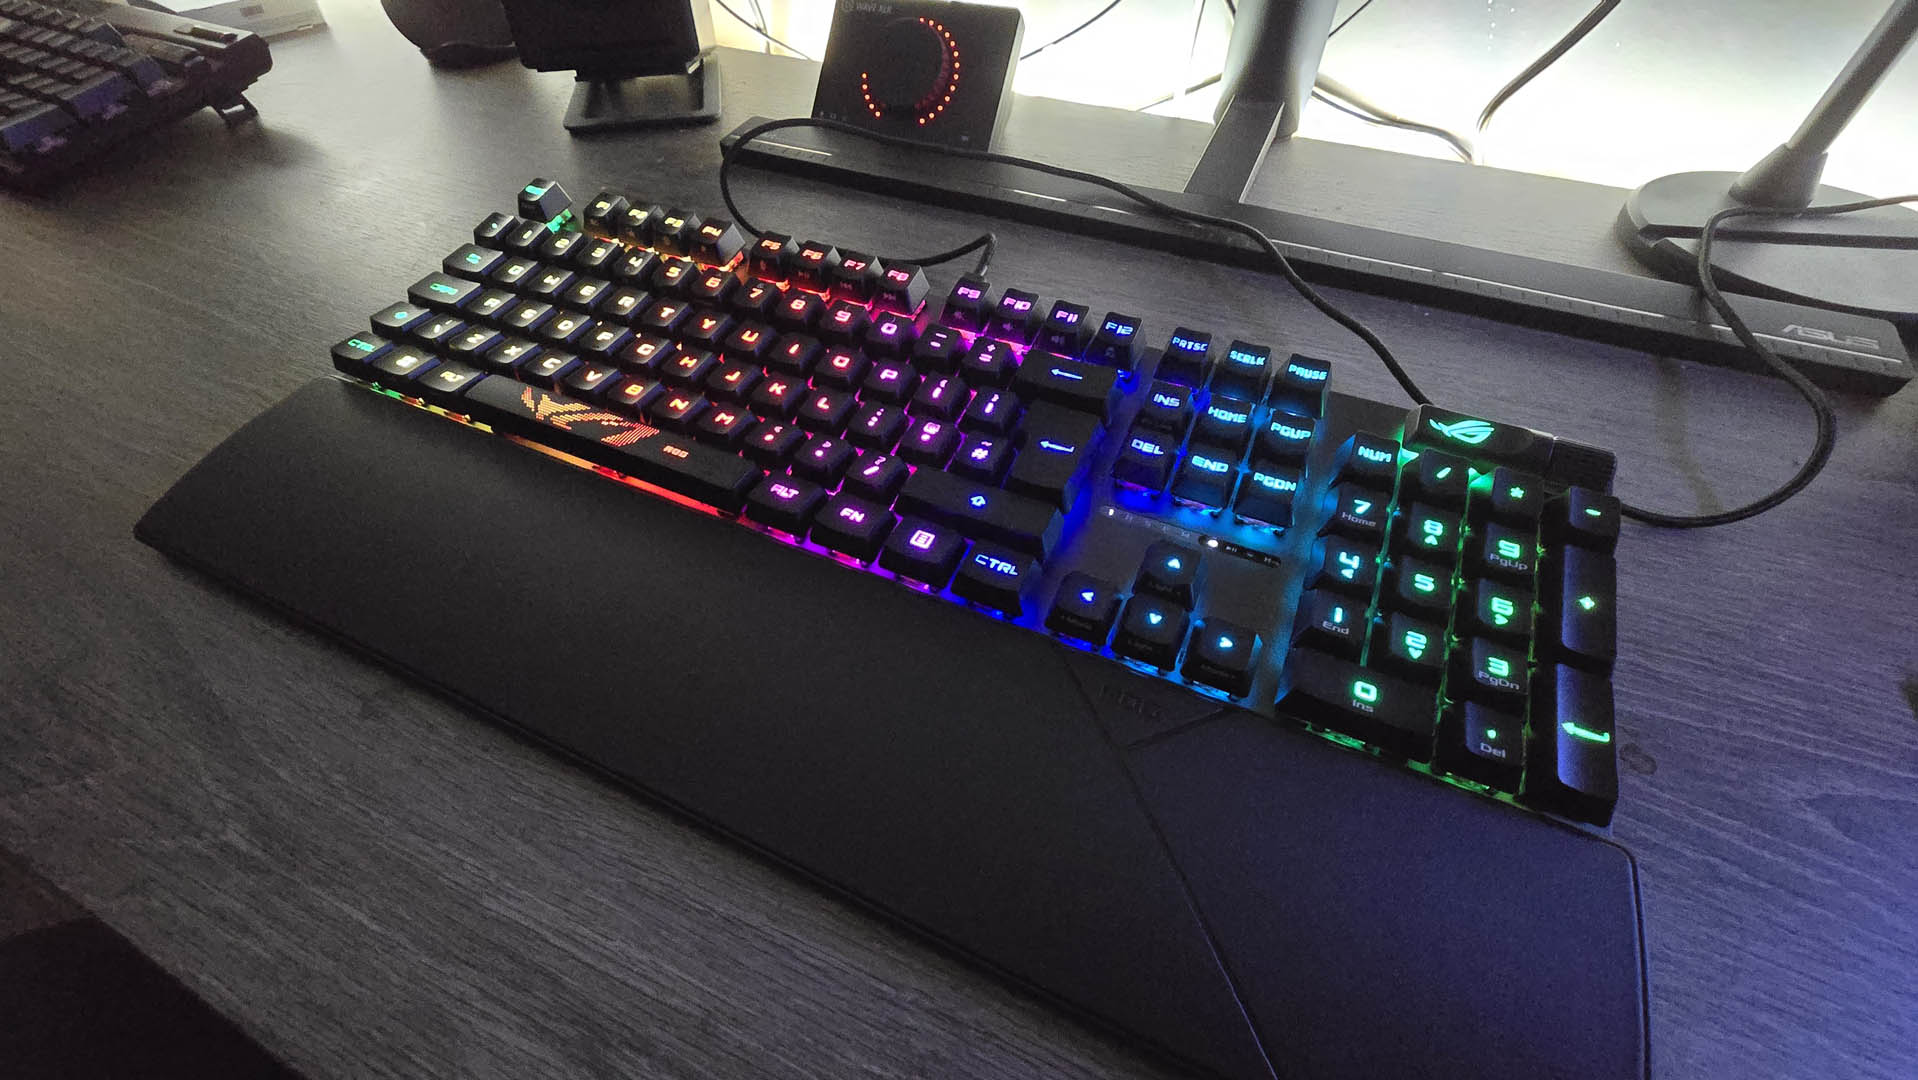 The Asus ROG Strix II RX gaming keyboard photographed on a wooden desk.